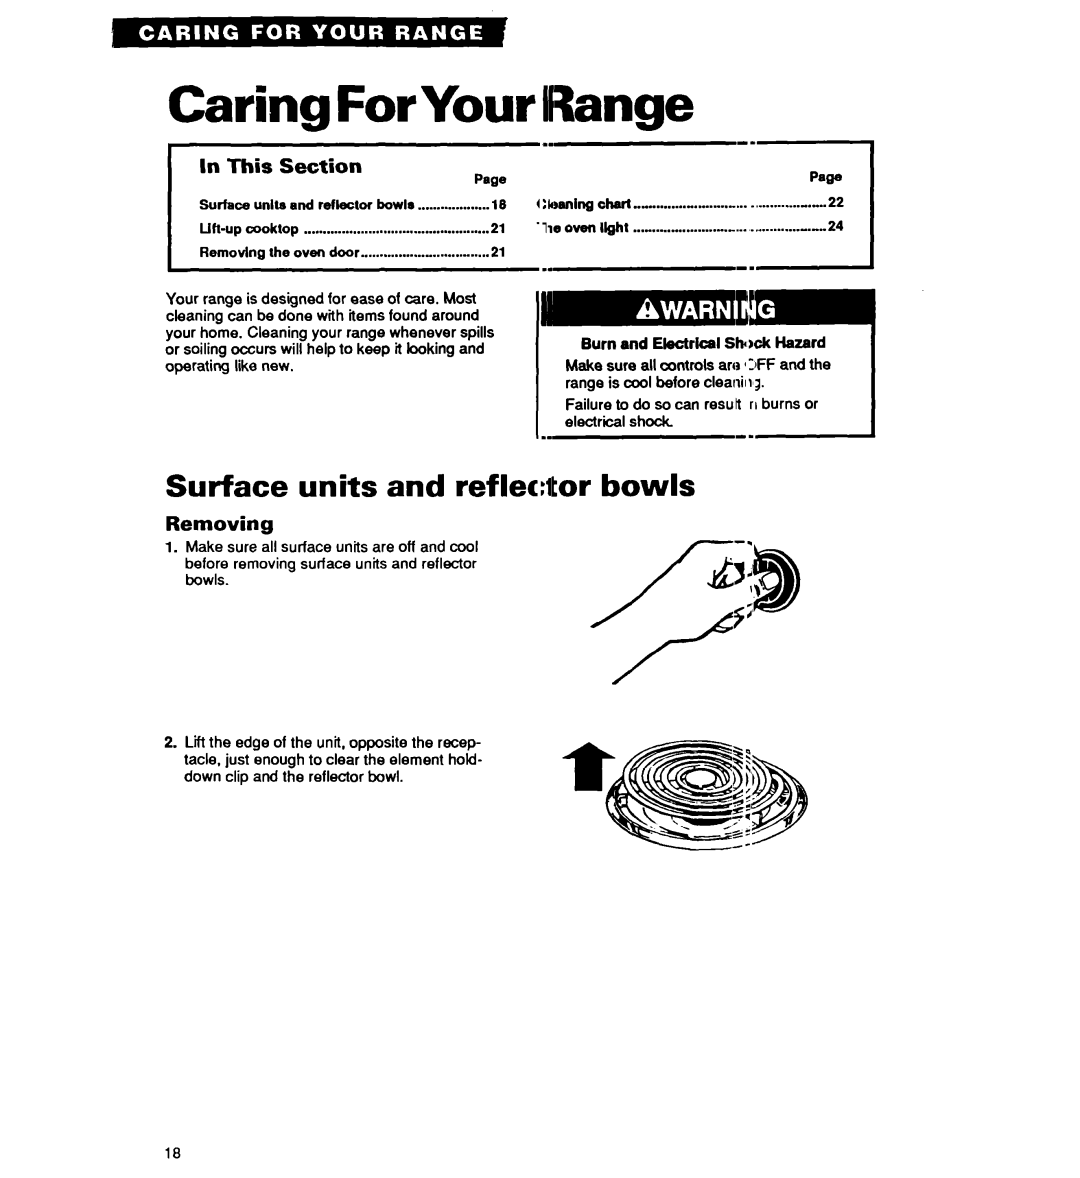 Whirlpool TER20WOY Caring ForYour, IRange, Surface units and reflec:tor bowls, Page, This, Section, Removing, reflector 